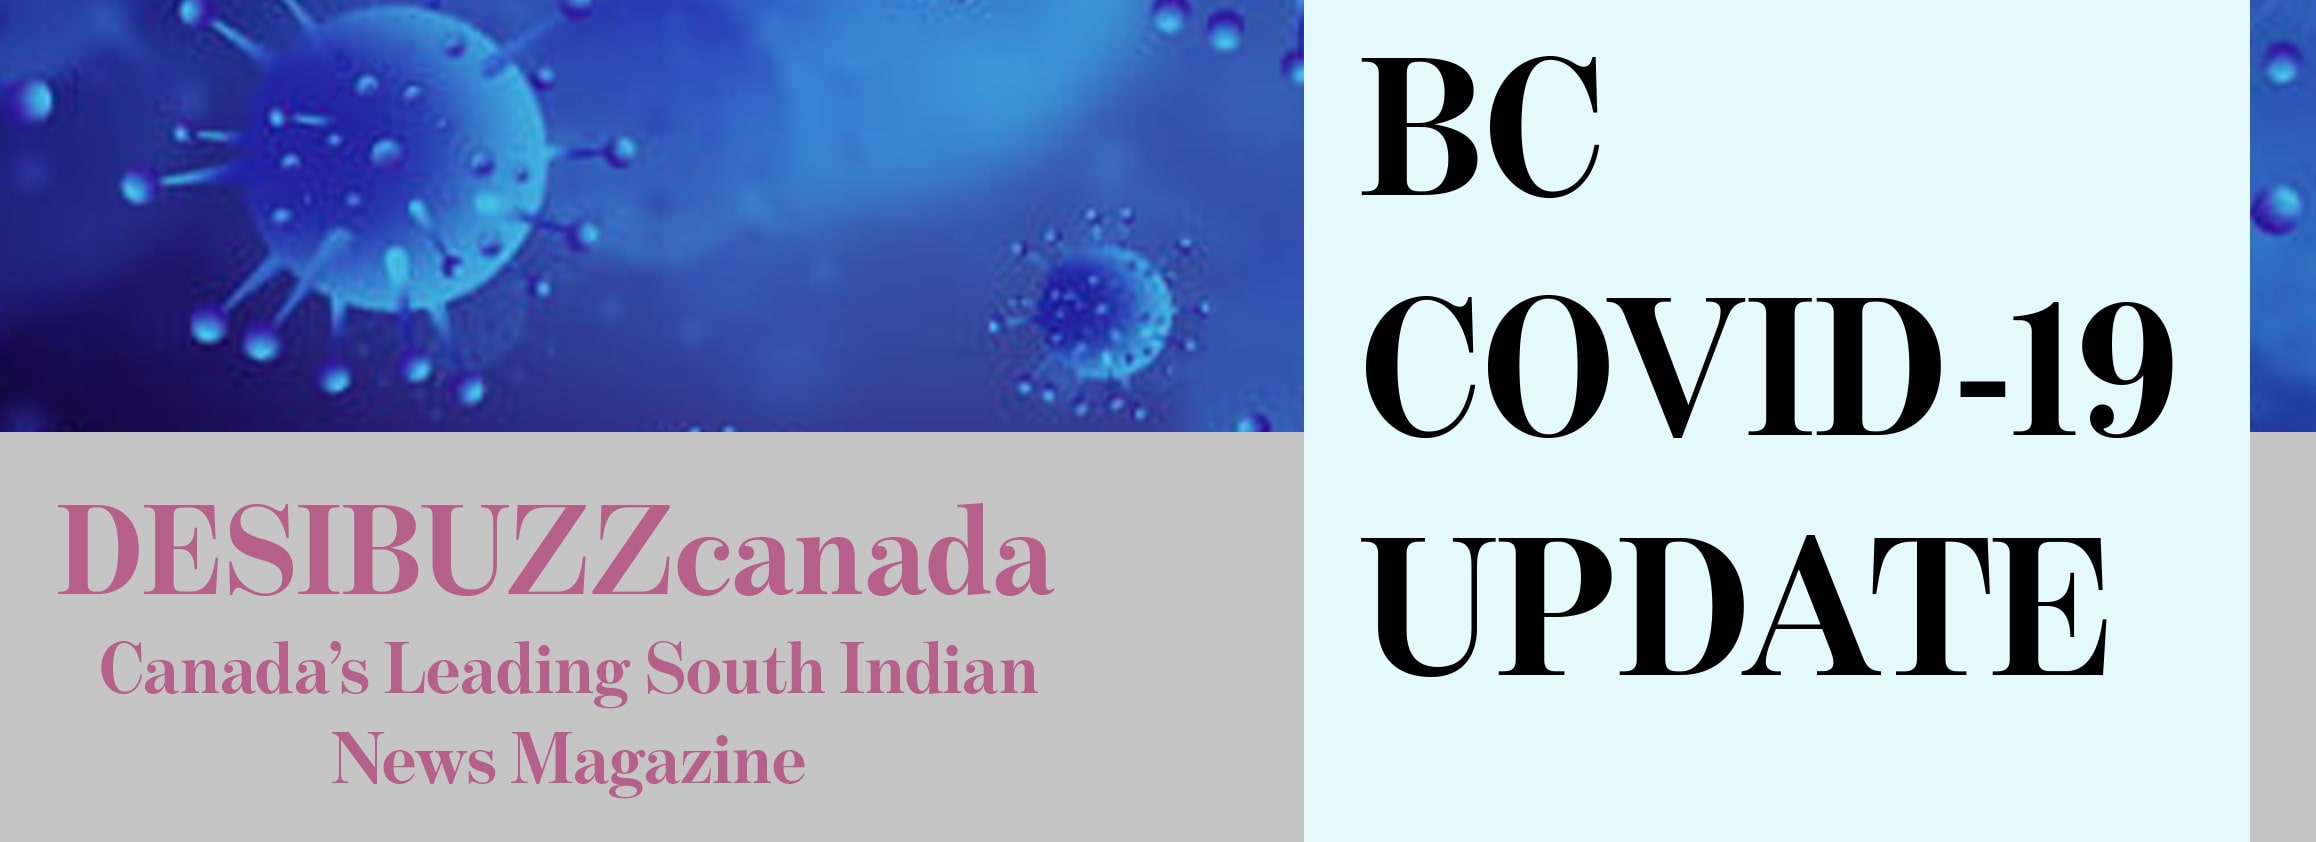 BC COVID-19 DAILY UPDATE: 411 Cases And Two Deaths Announced Tuesday As Downward Trend Continues